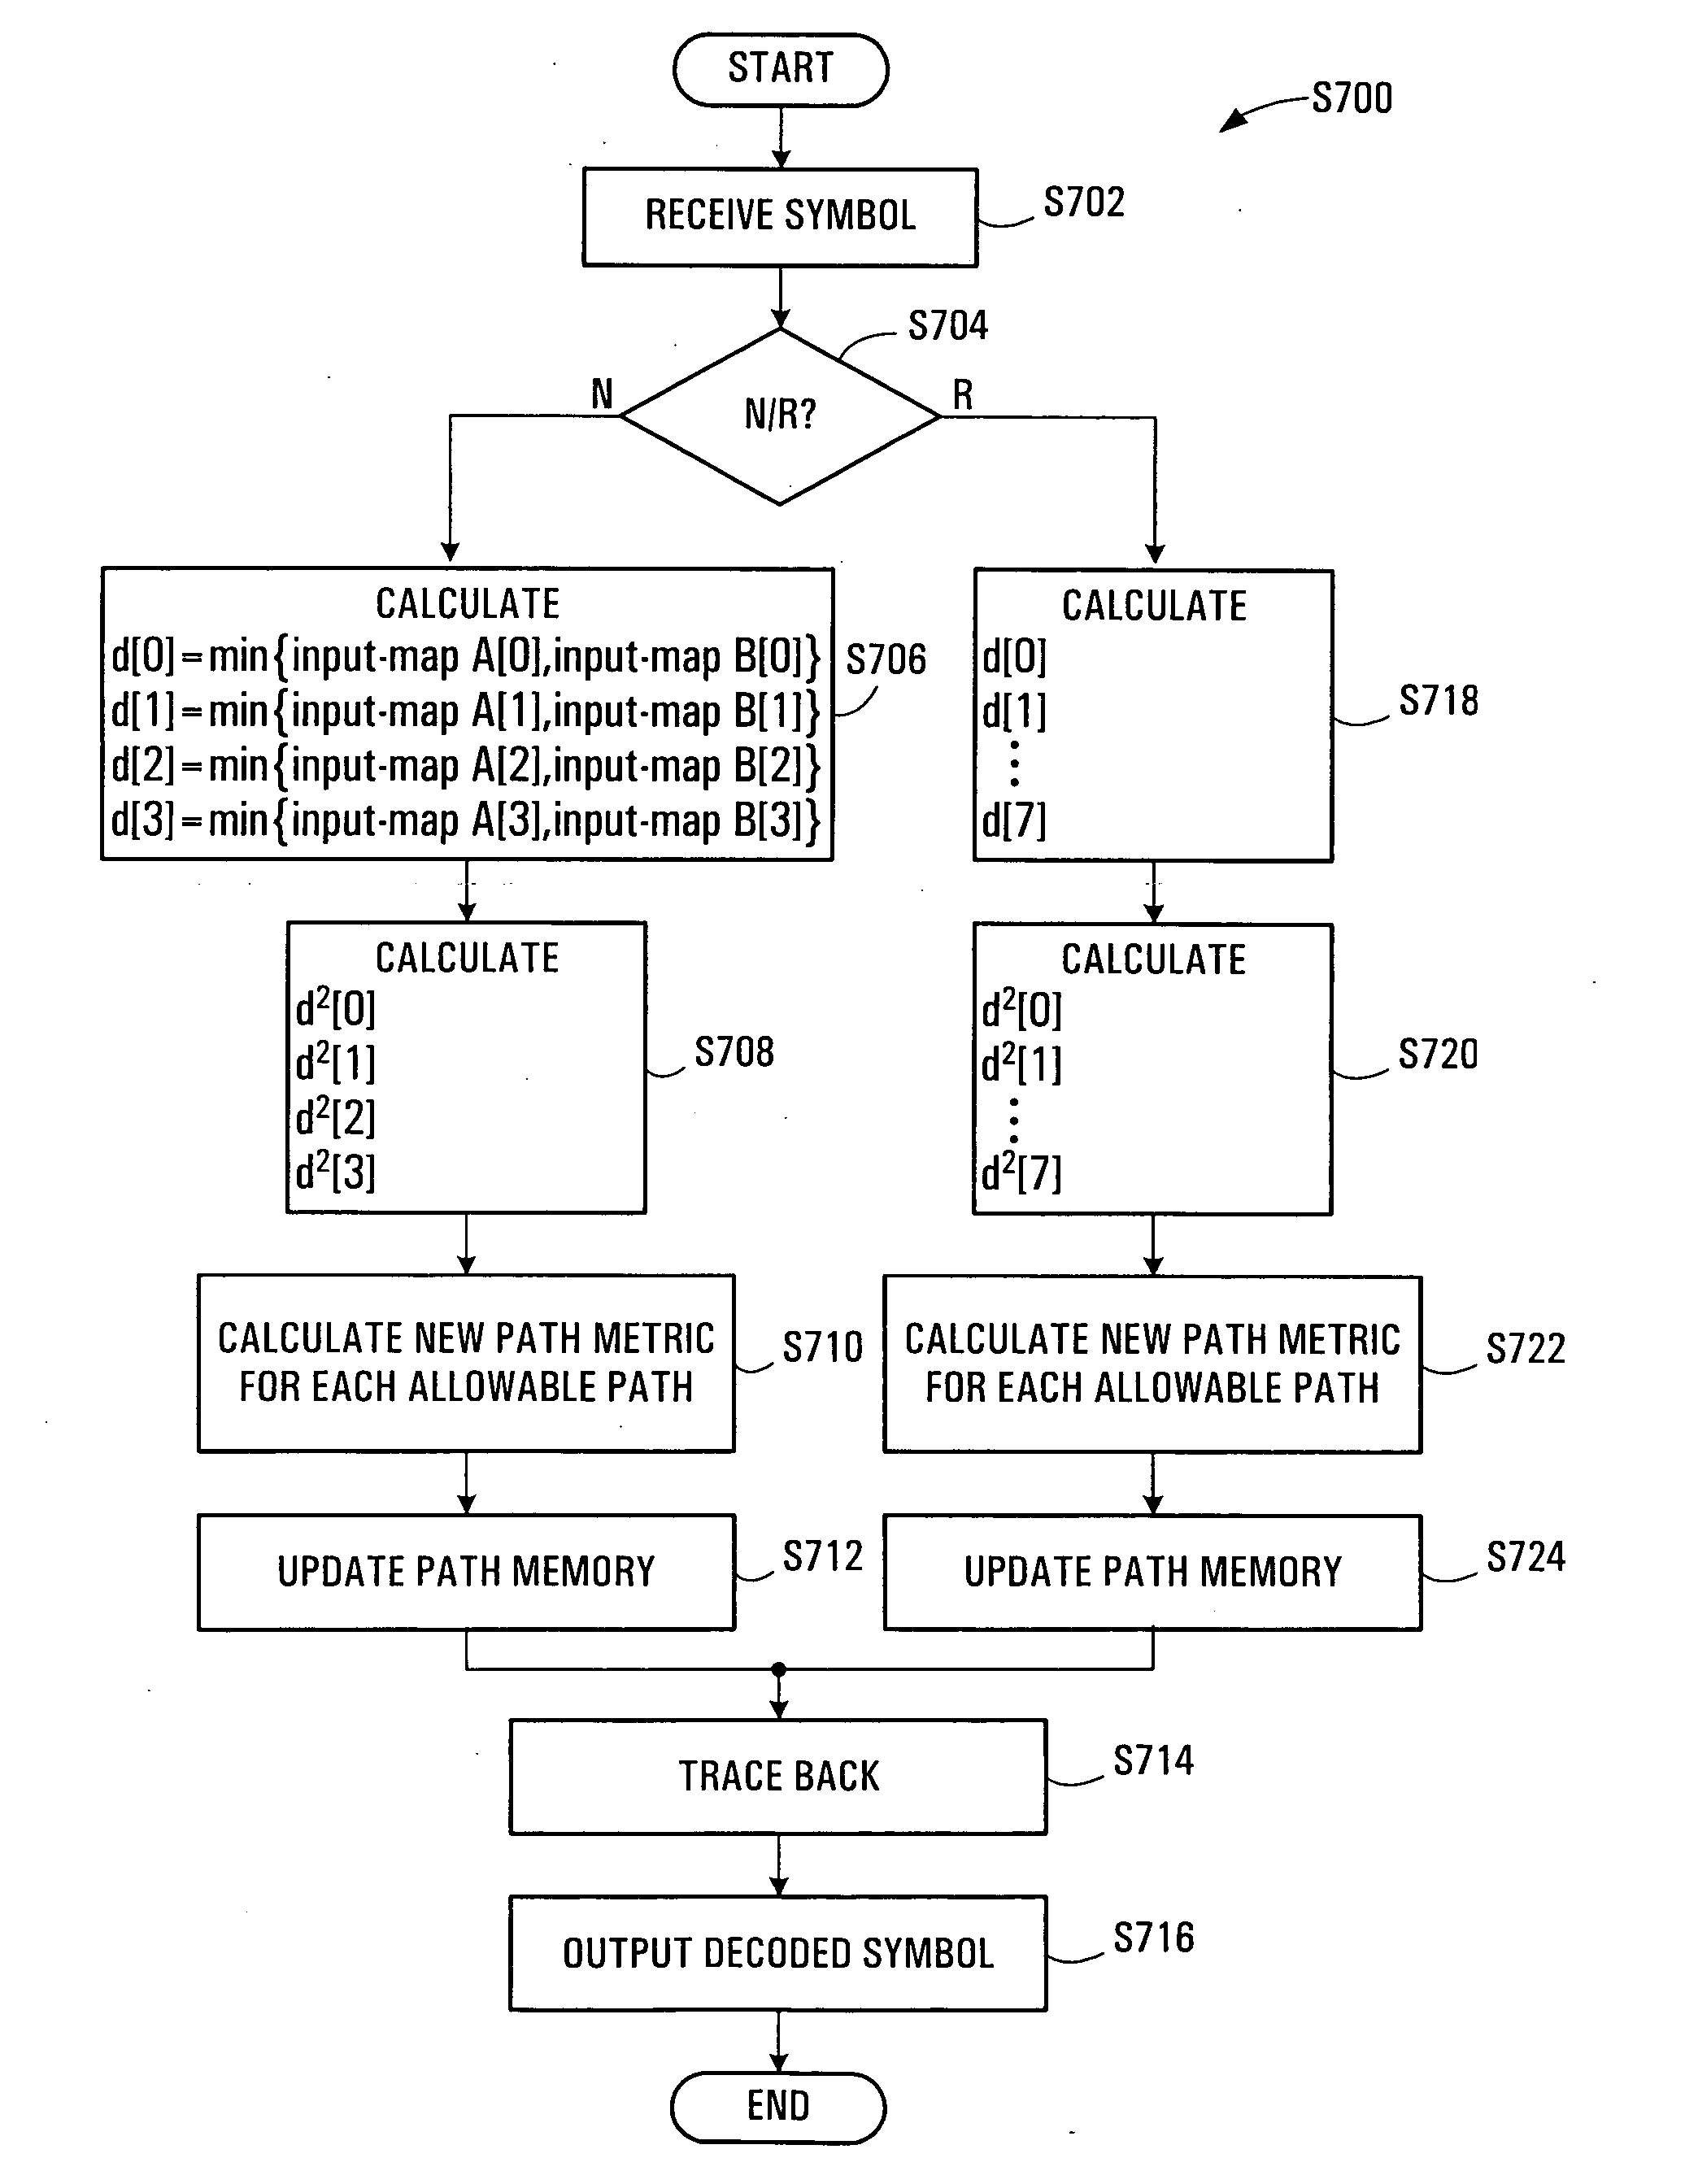 Trellis decoder for decoding data stream including symbols coded with multiple convolutional codes